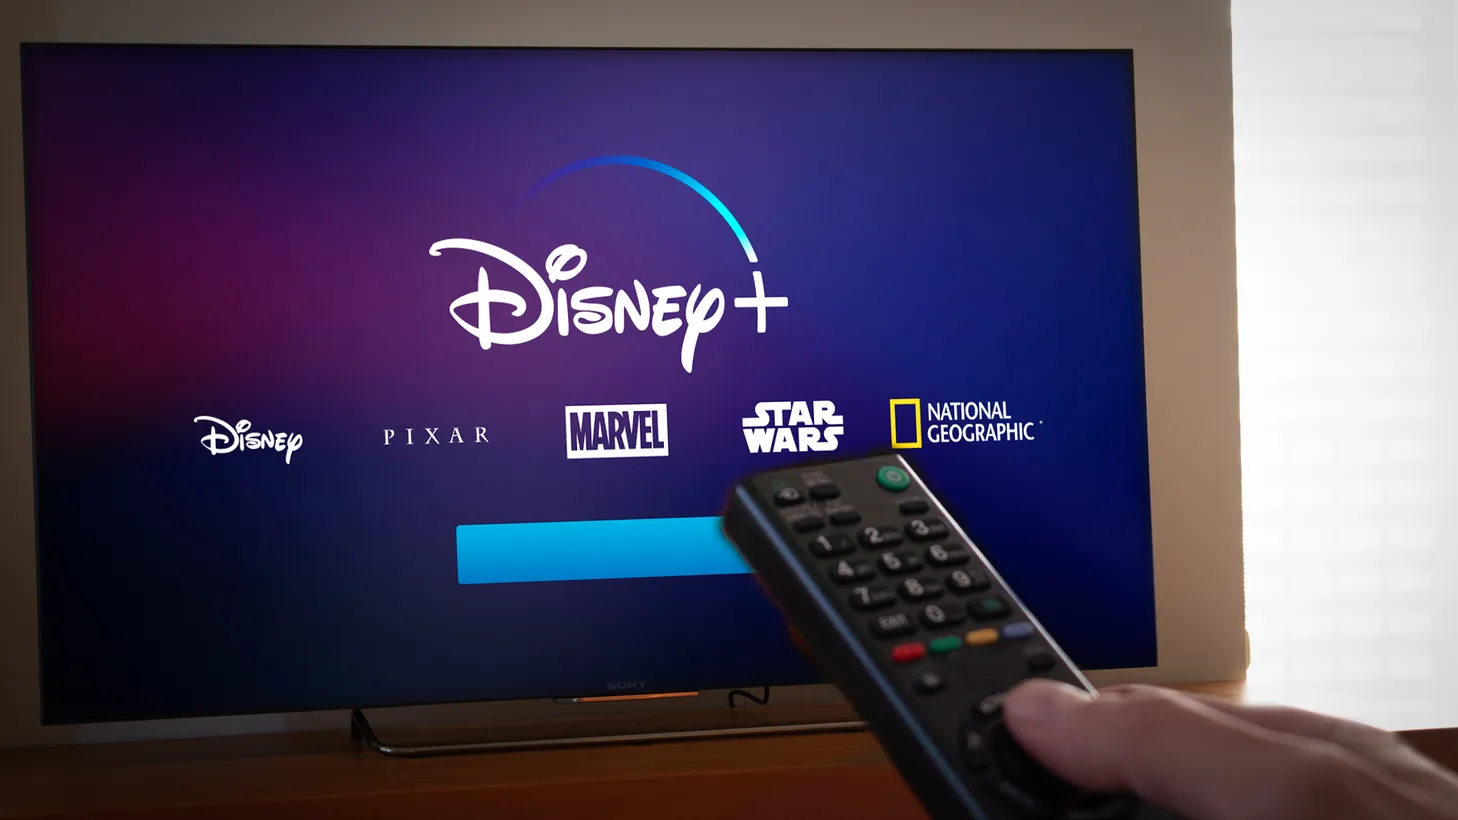 Disney+ and Netflix continue the battle for who will be top streaming service.